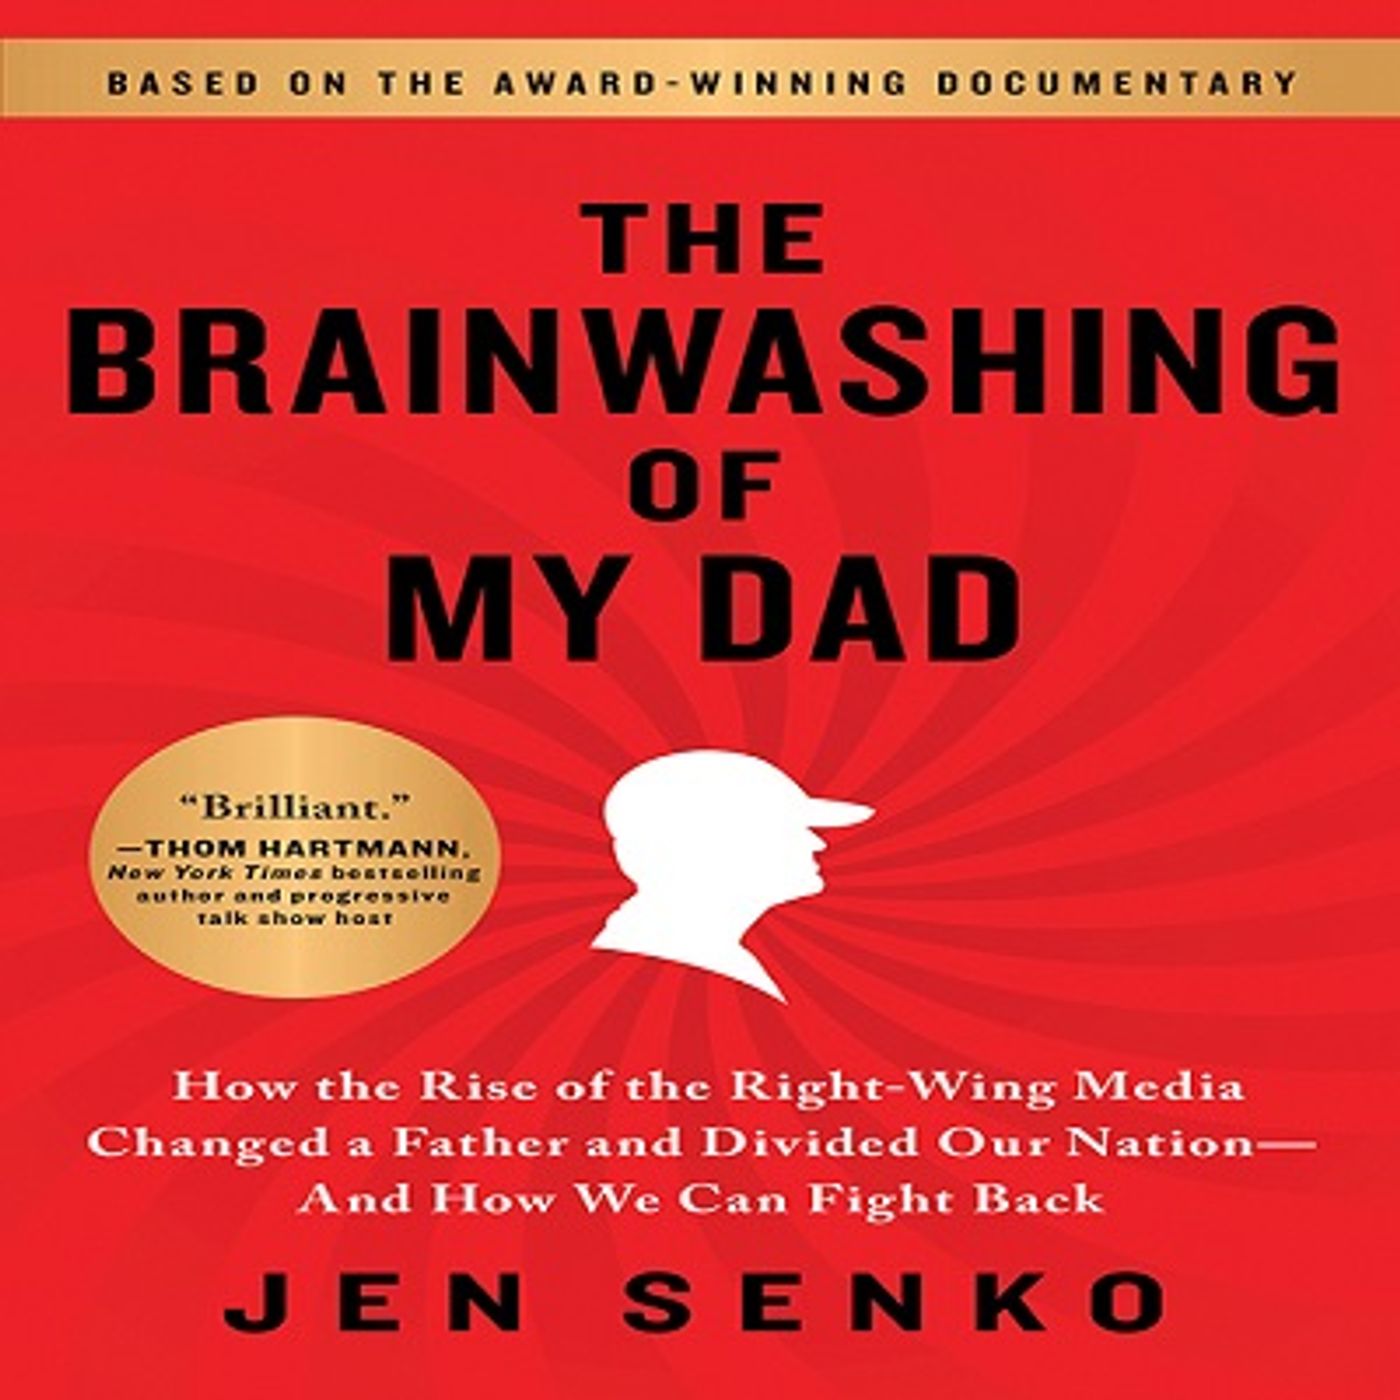 P4T 6-14   "THE BRAINWASHING OF MY DAD" PT2 with SPECIAL GUEST JEN SENKO